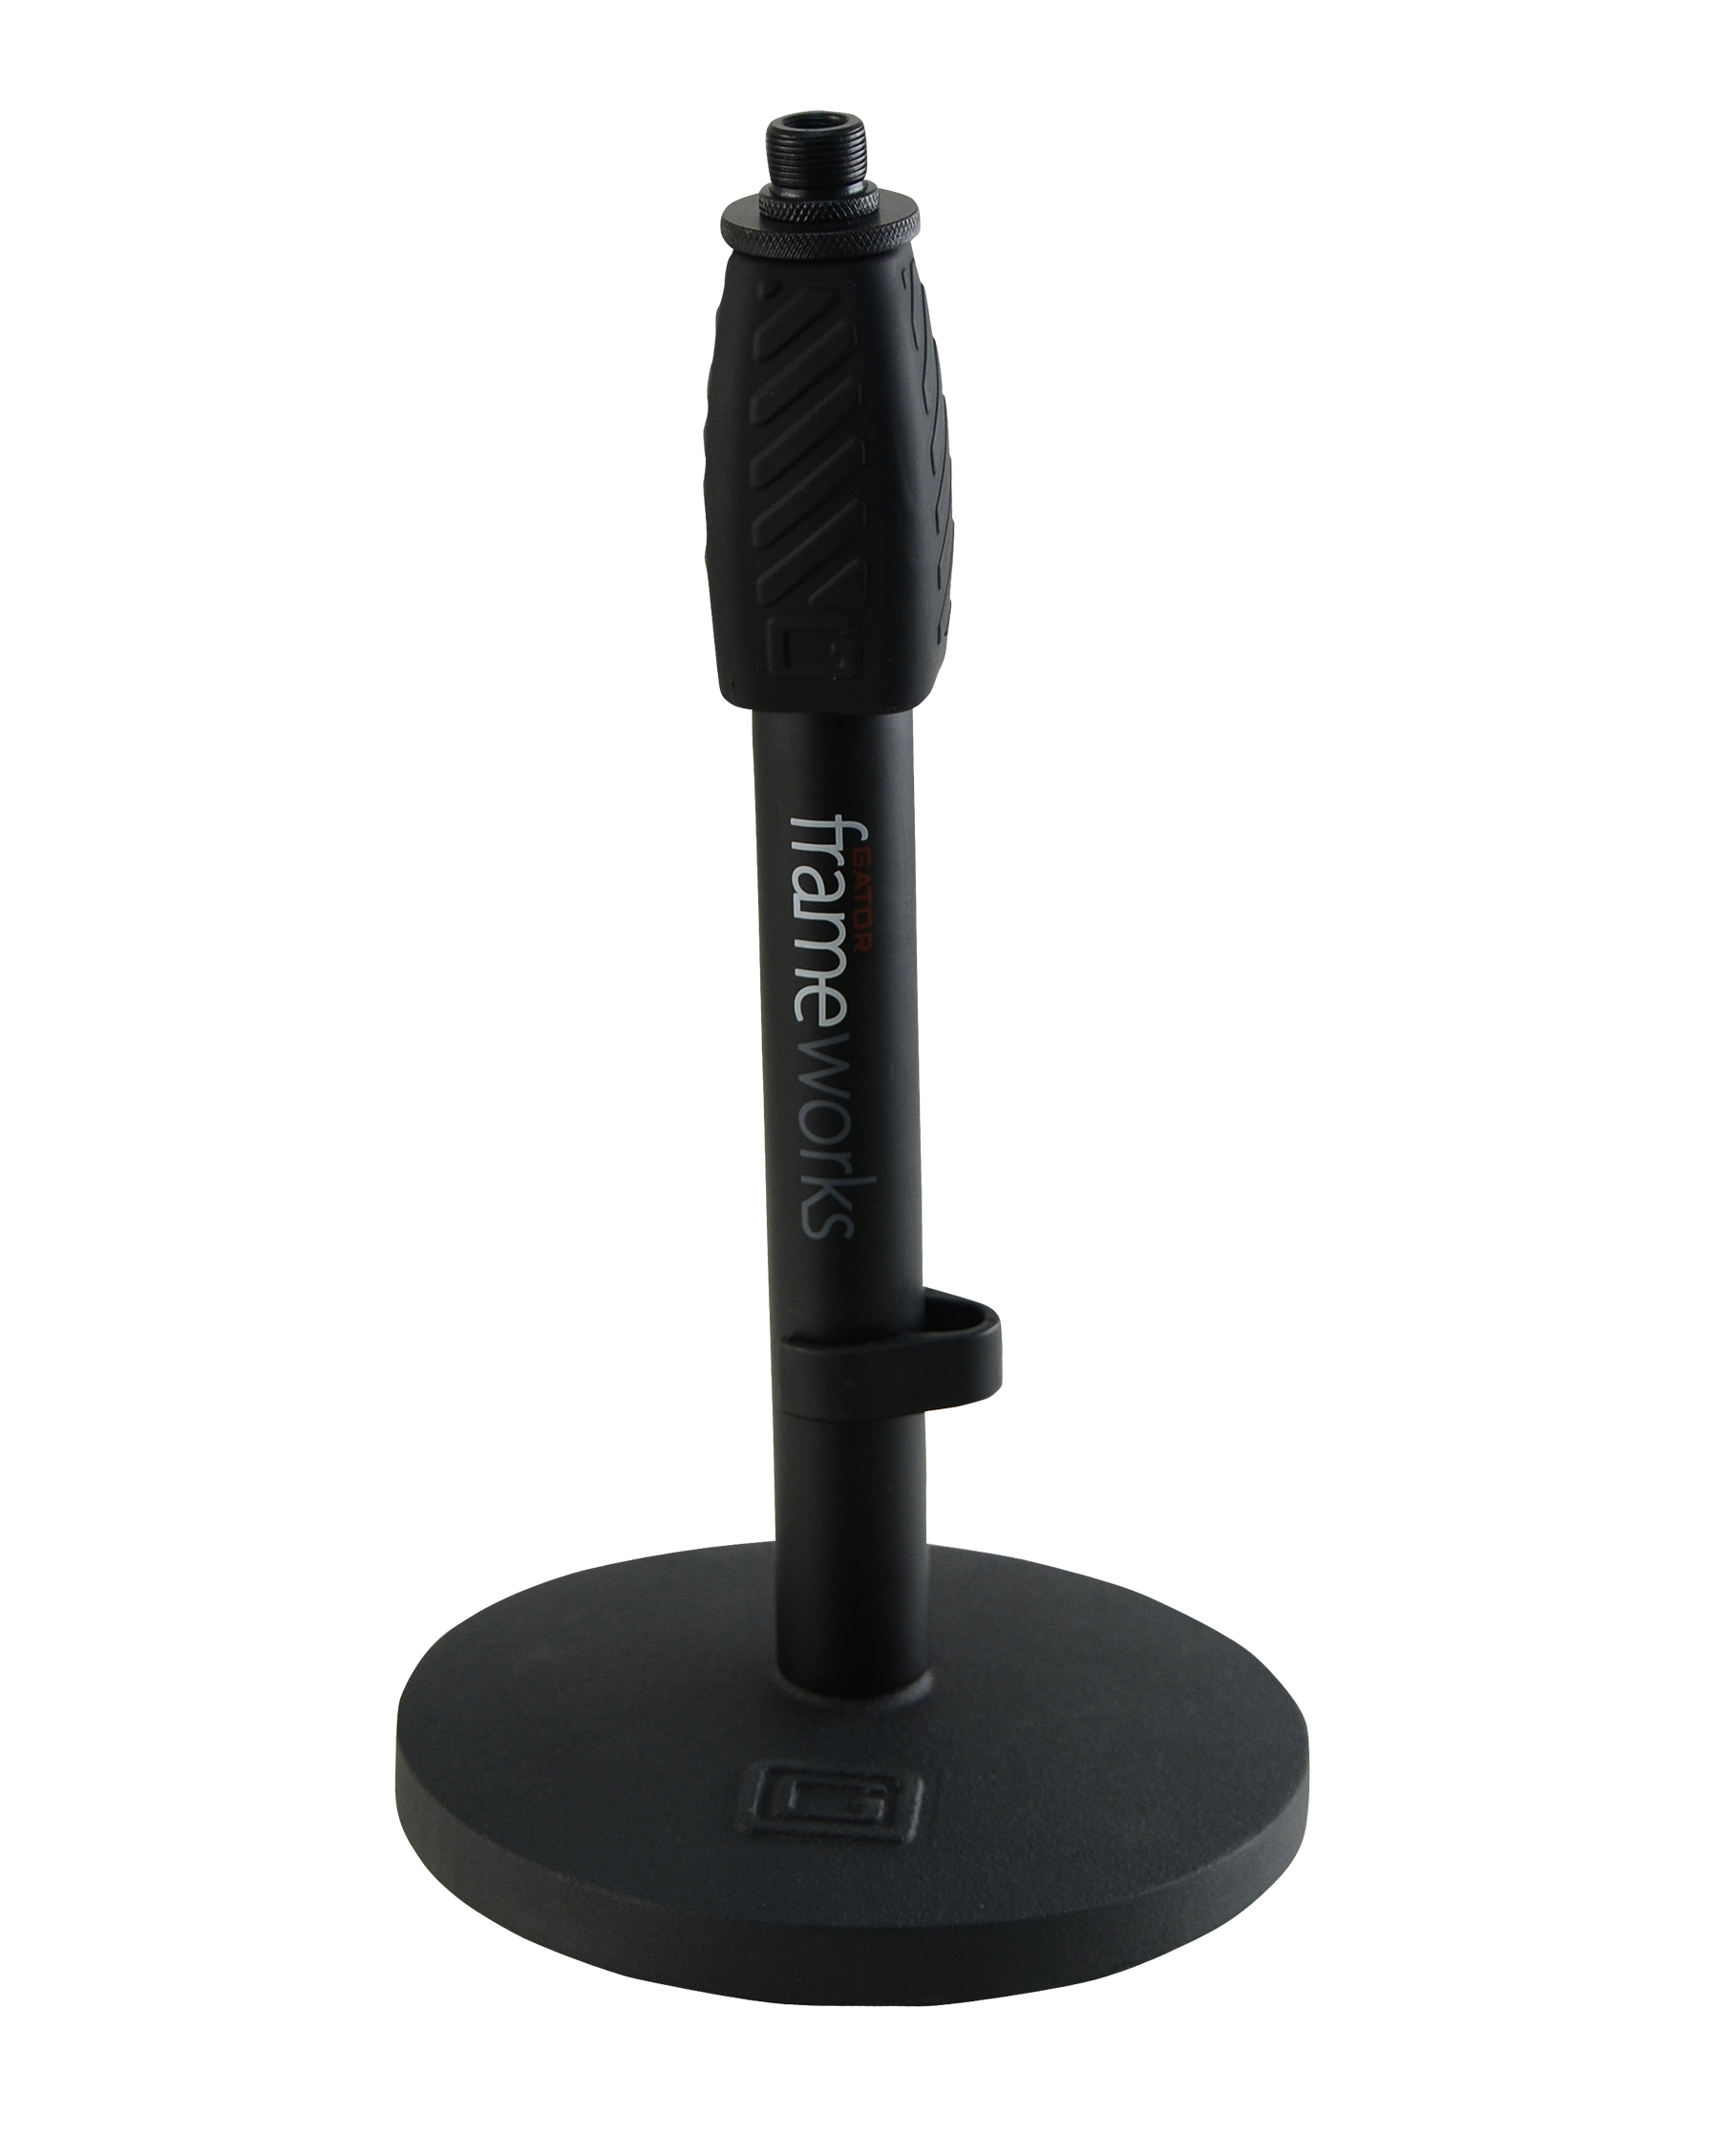 Desktop Mic Stand with Round Base and Twist Clutch-GFW-MIC-0601